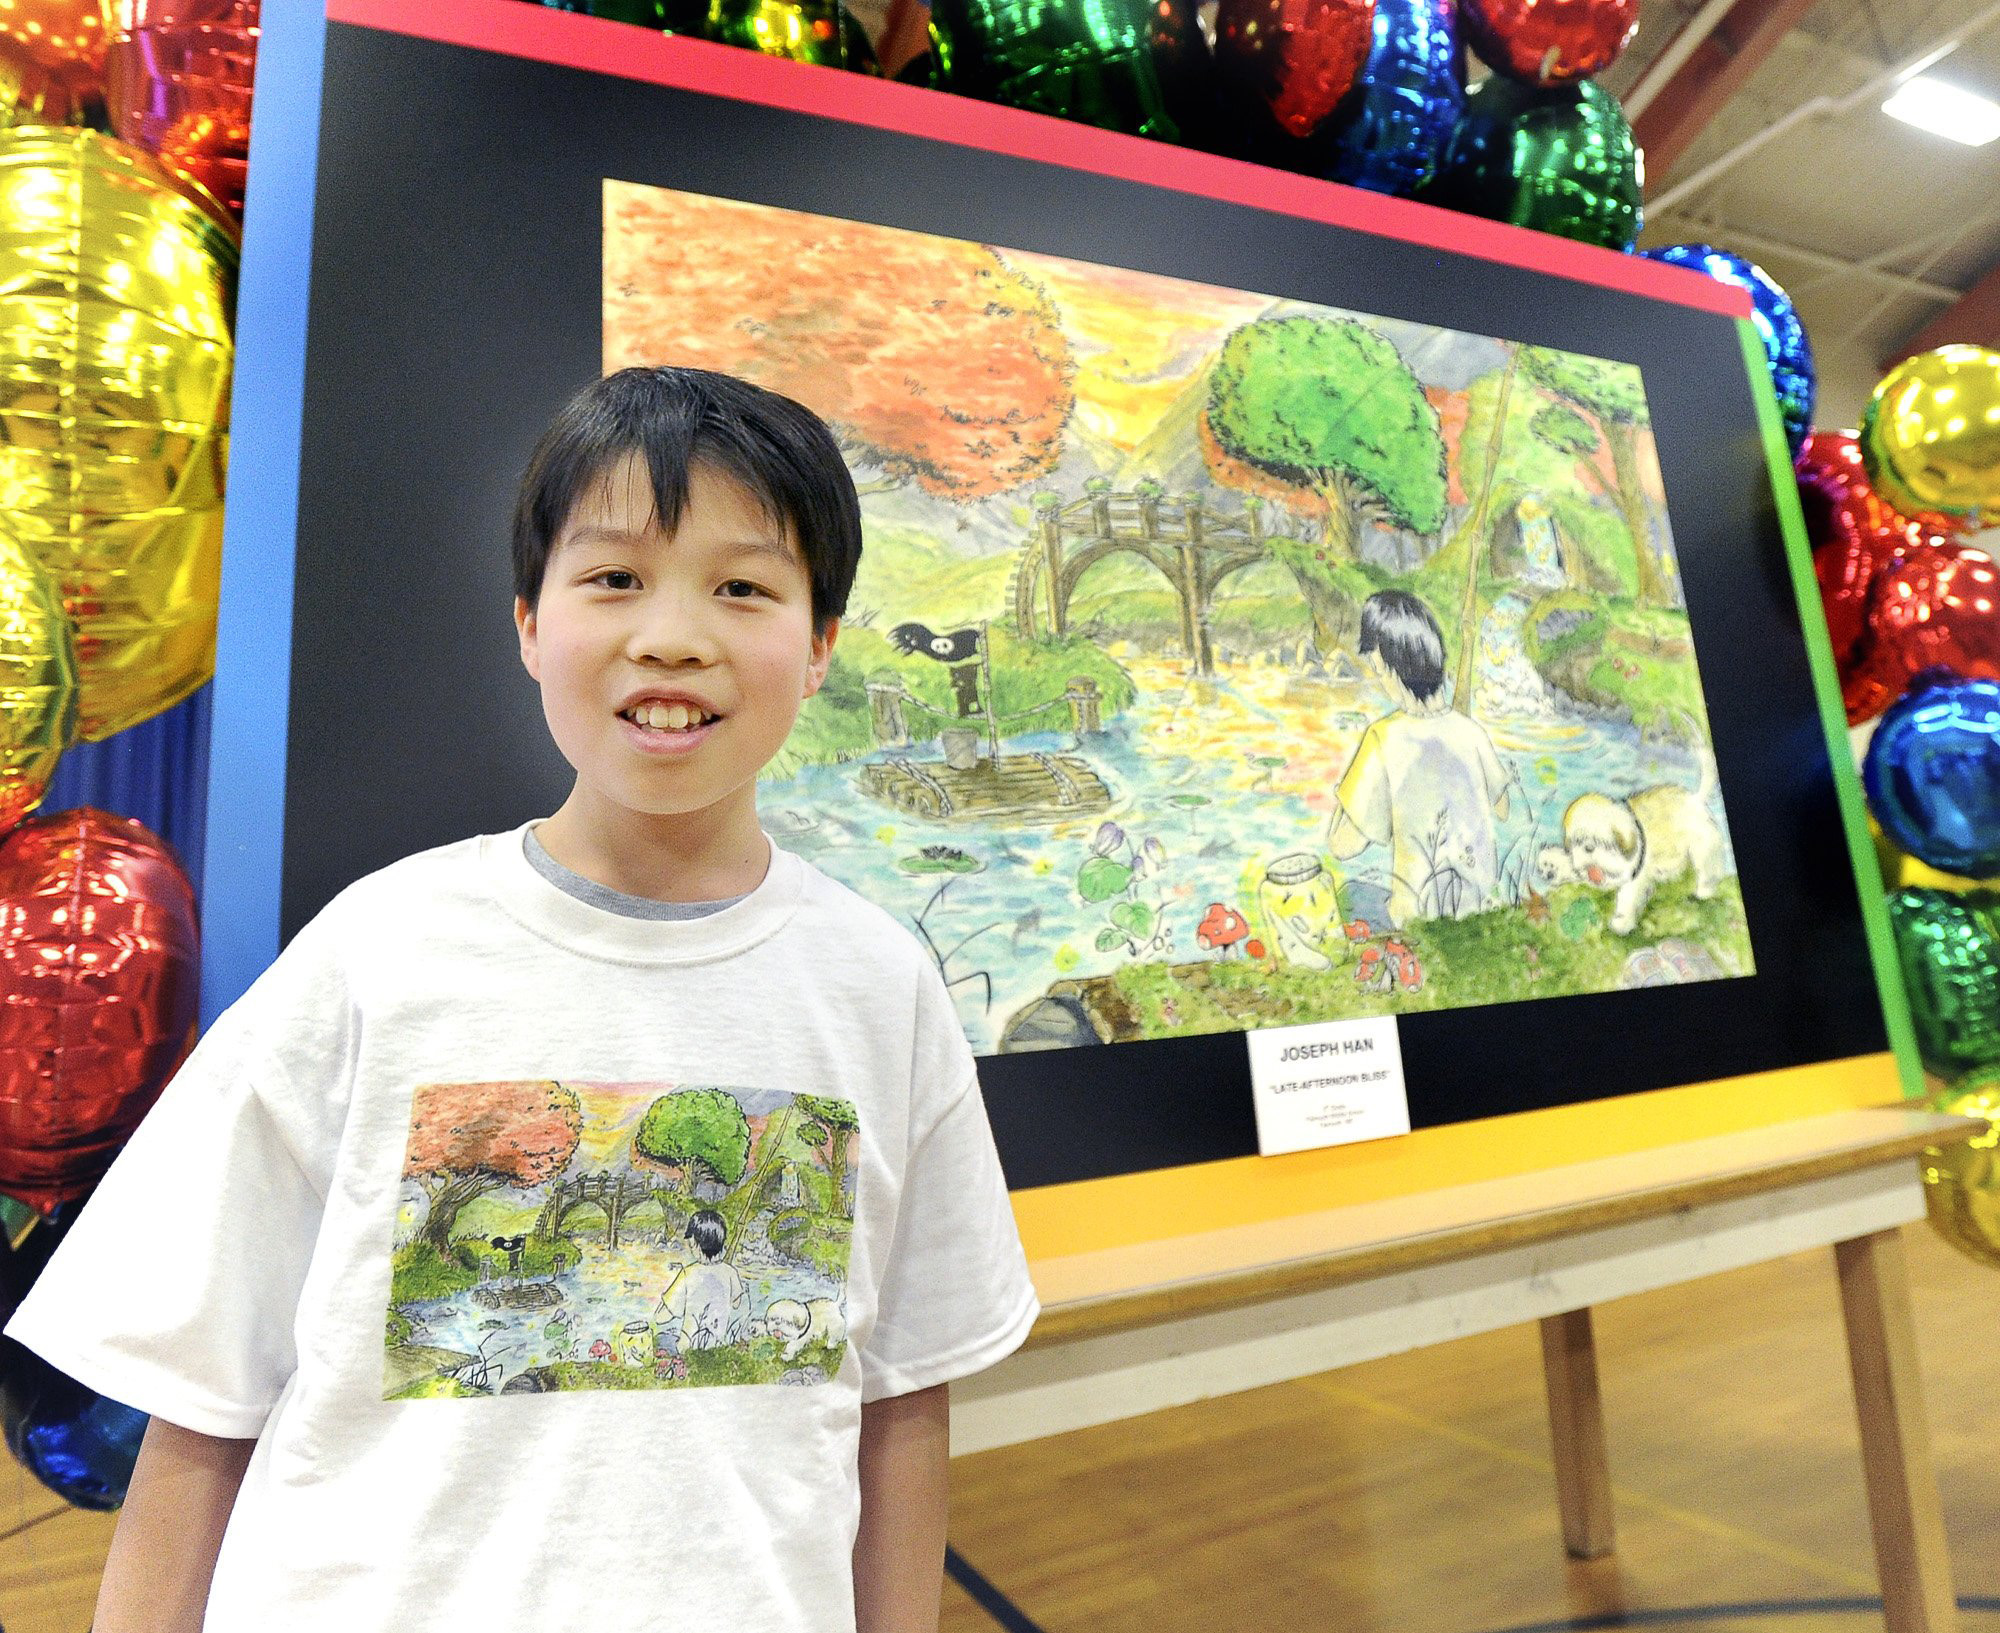 Wed. May 1,2013. 14 year old Joey Han, a 8th grade student at Falmouth Middle School, was honored as